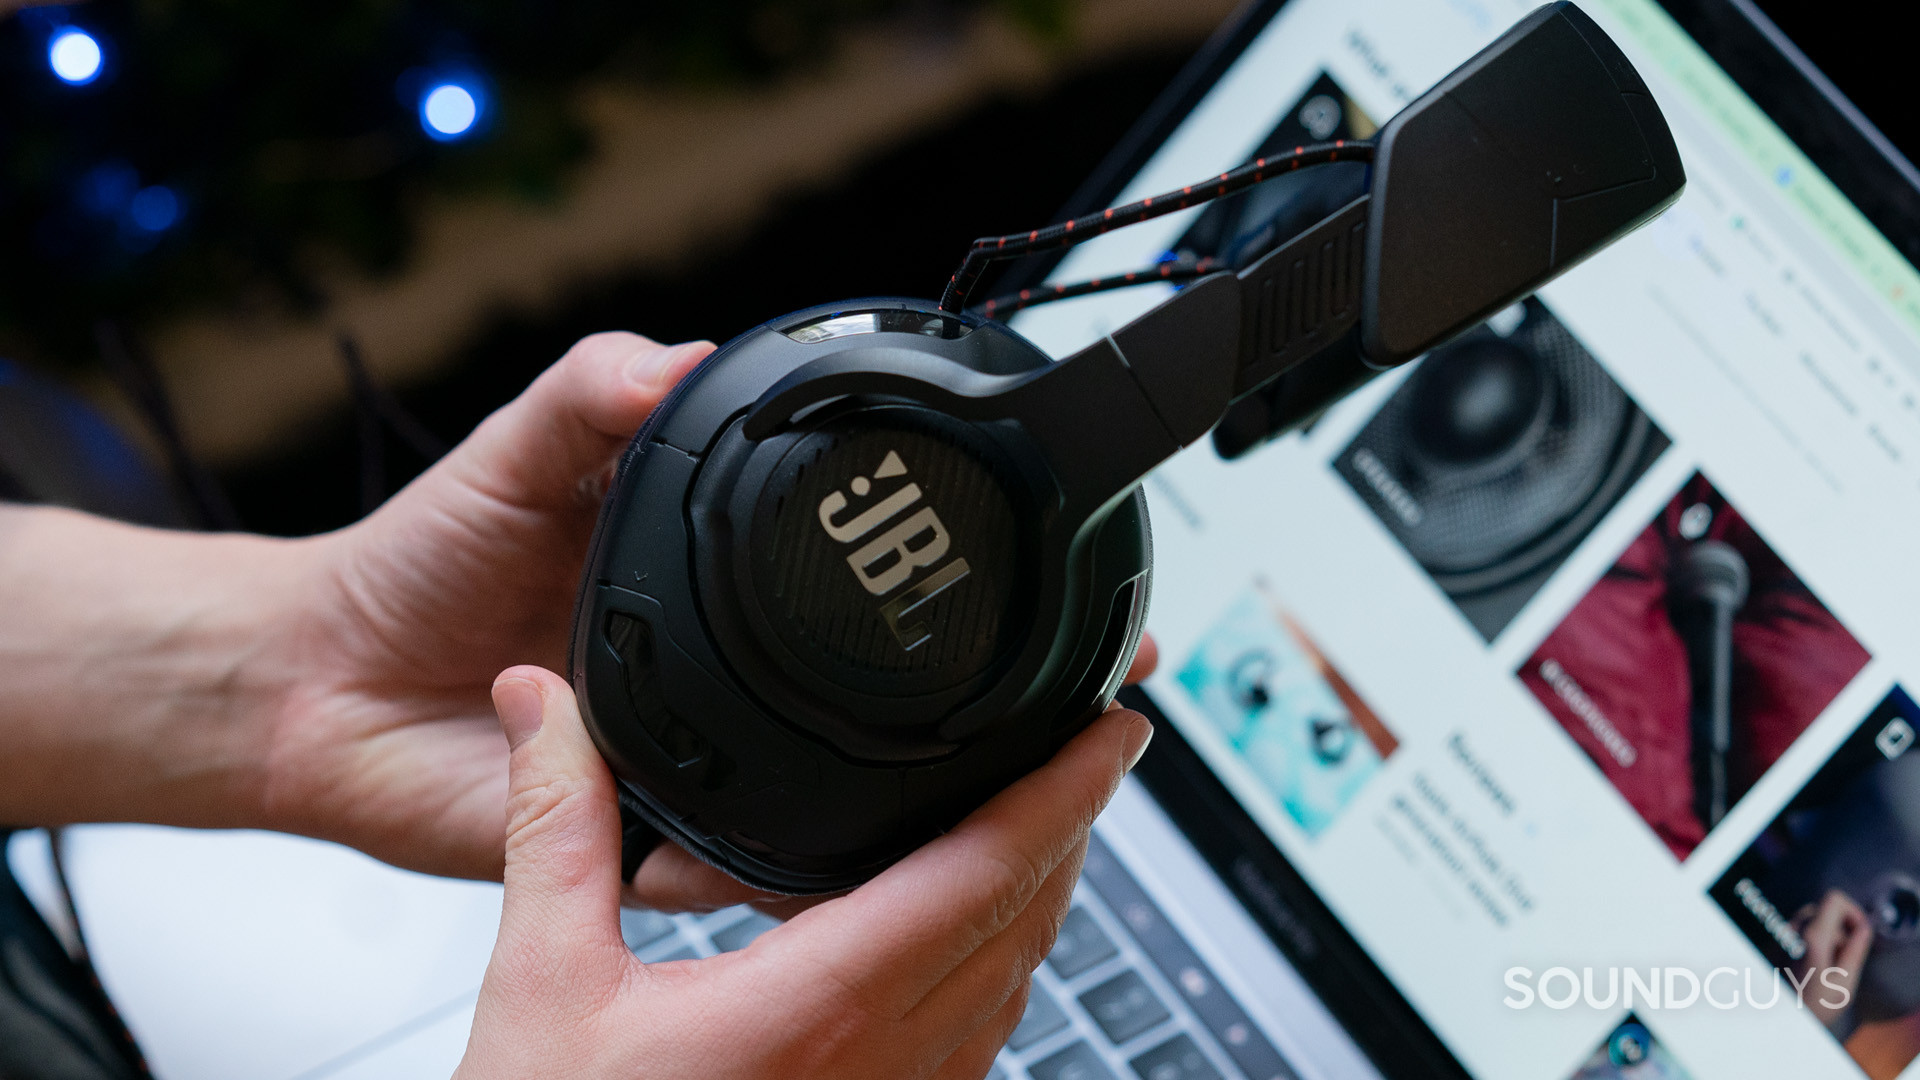 The JBL Quantum One being held in someone's hands with a laptop in the background